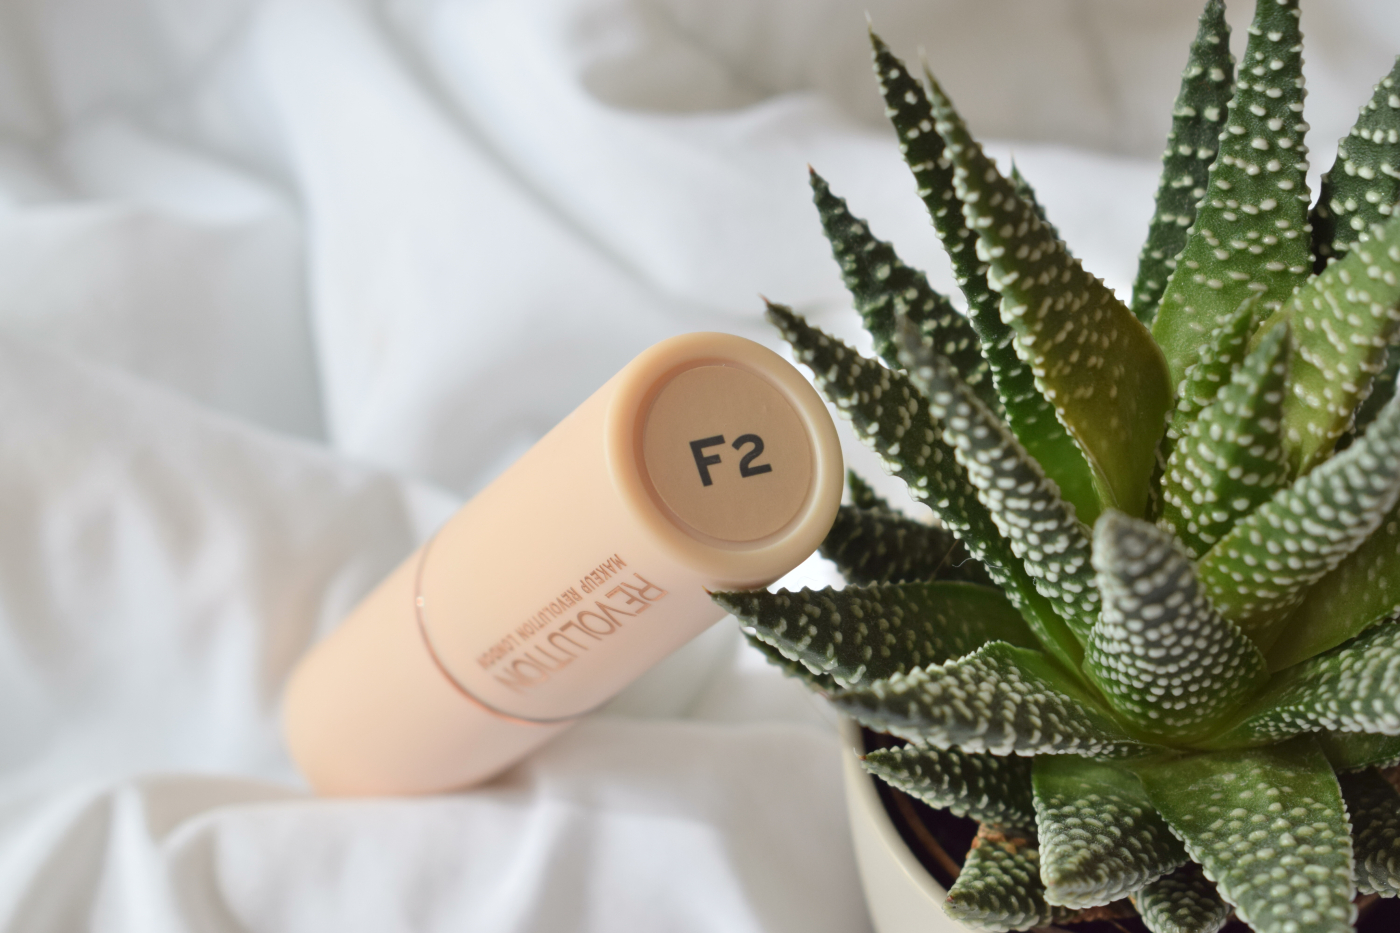 Revolution-fast-base-foundation-stick-review-and-swatches (7)